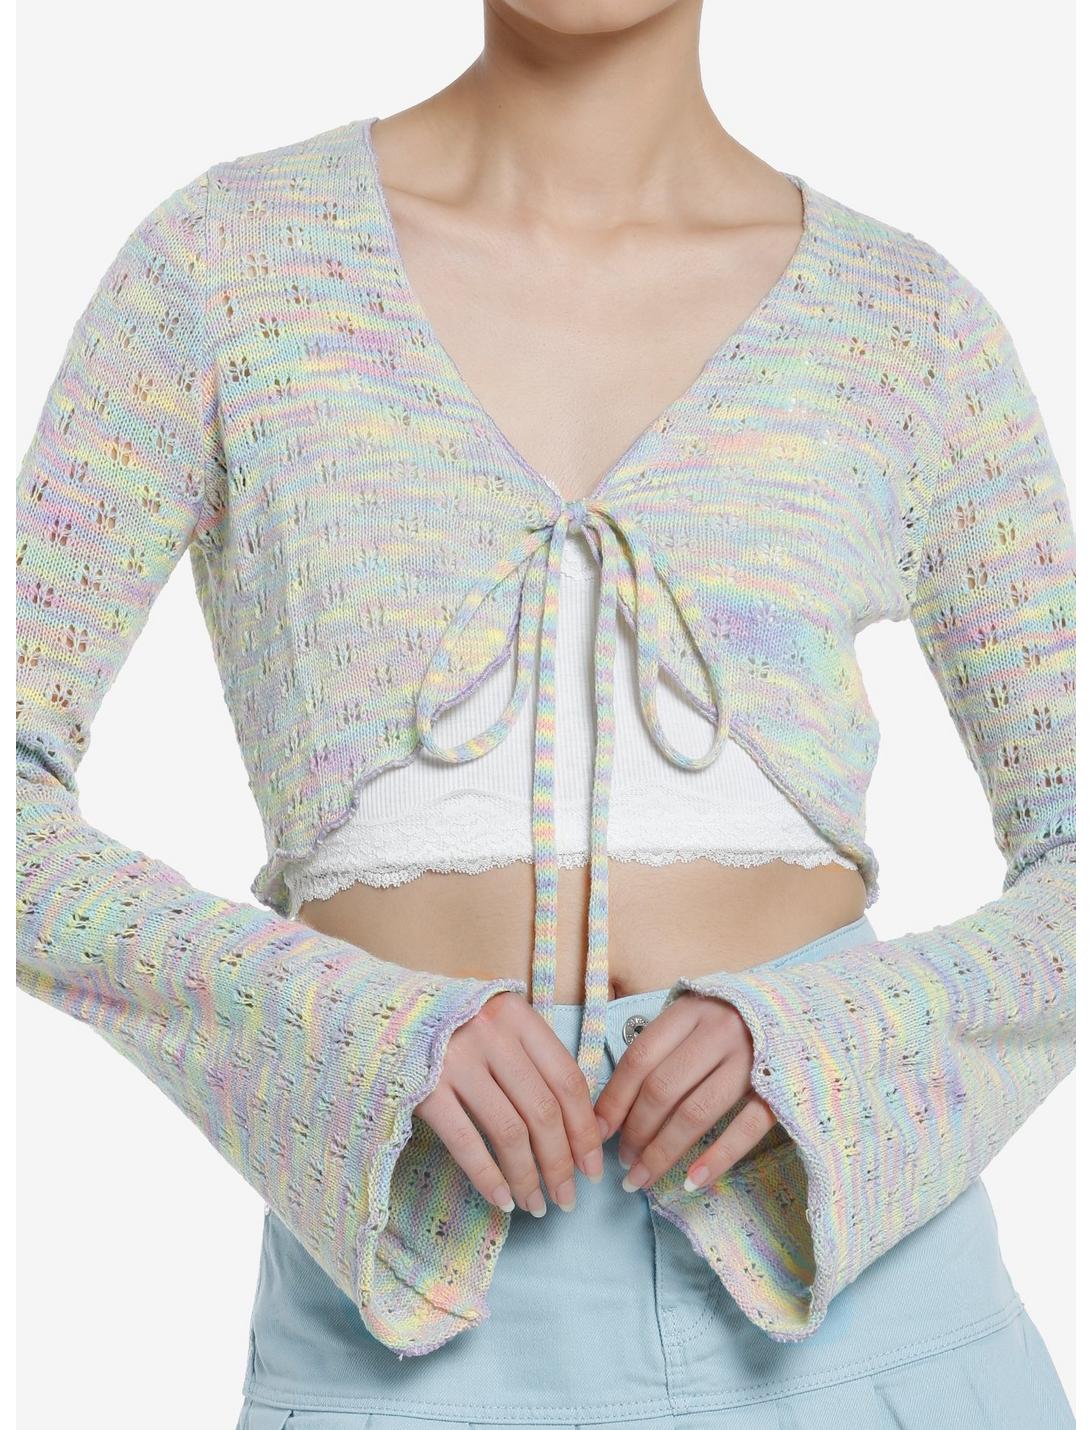 Thorn & Fable Pastel Rainbow Girls Bell Sleeve Knit Shrug, PINK, hi-res